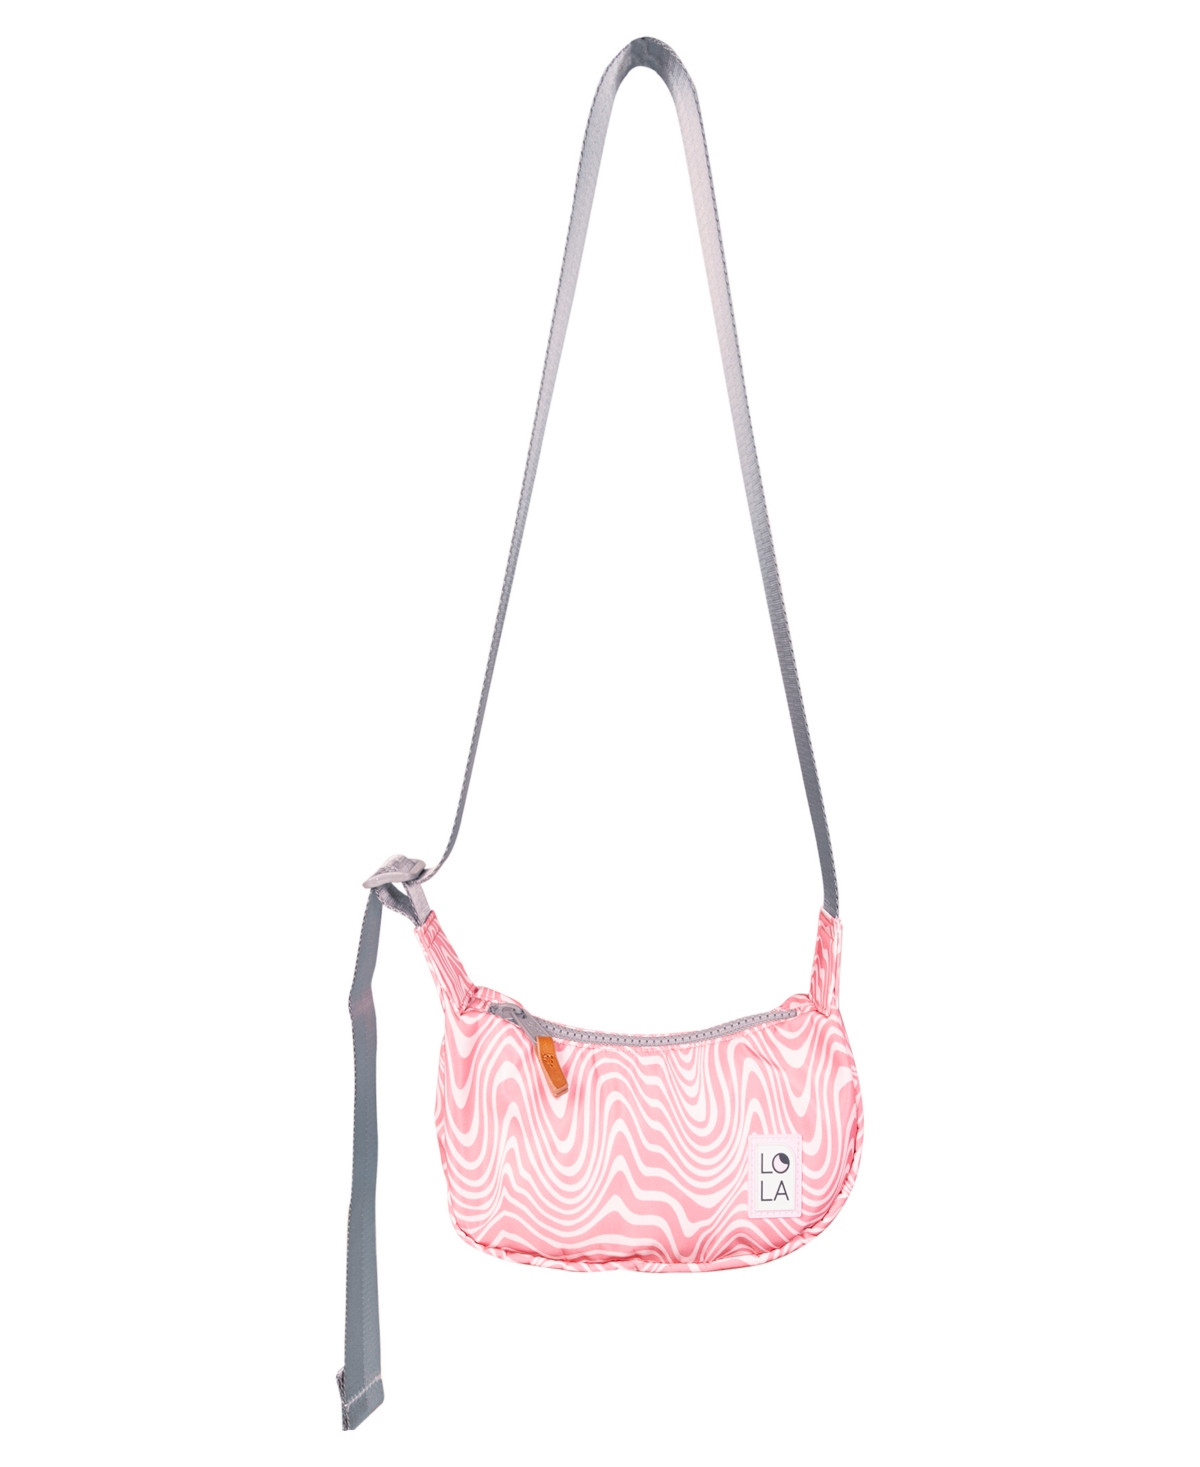 Lola Crescent Small Moon Bag In Pink